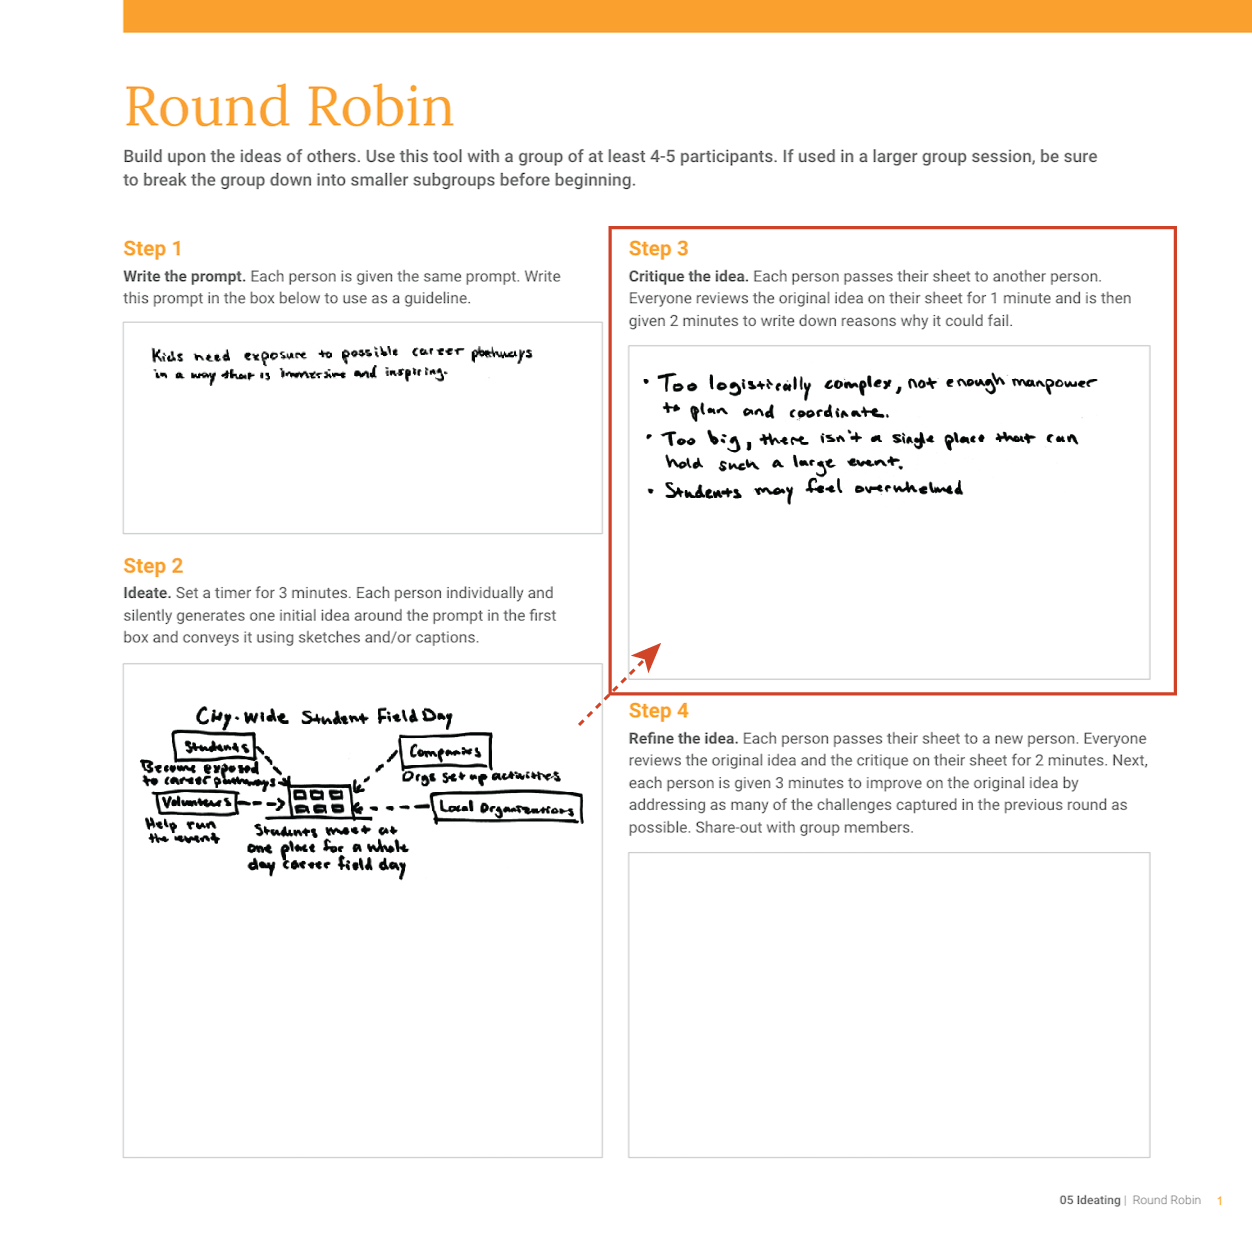 image of round robin worksheet with step 3 filled in